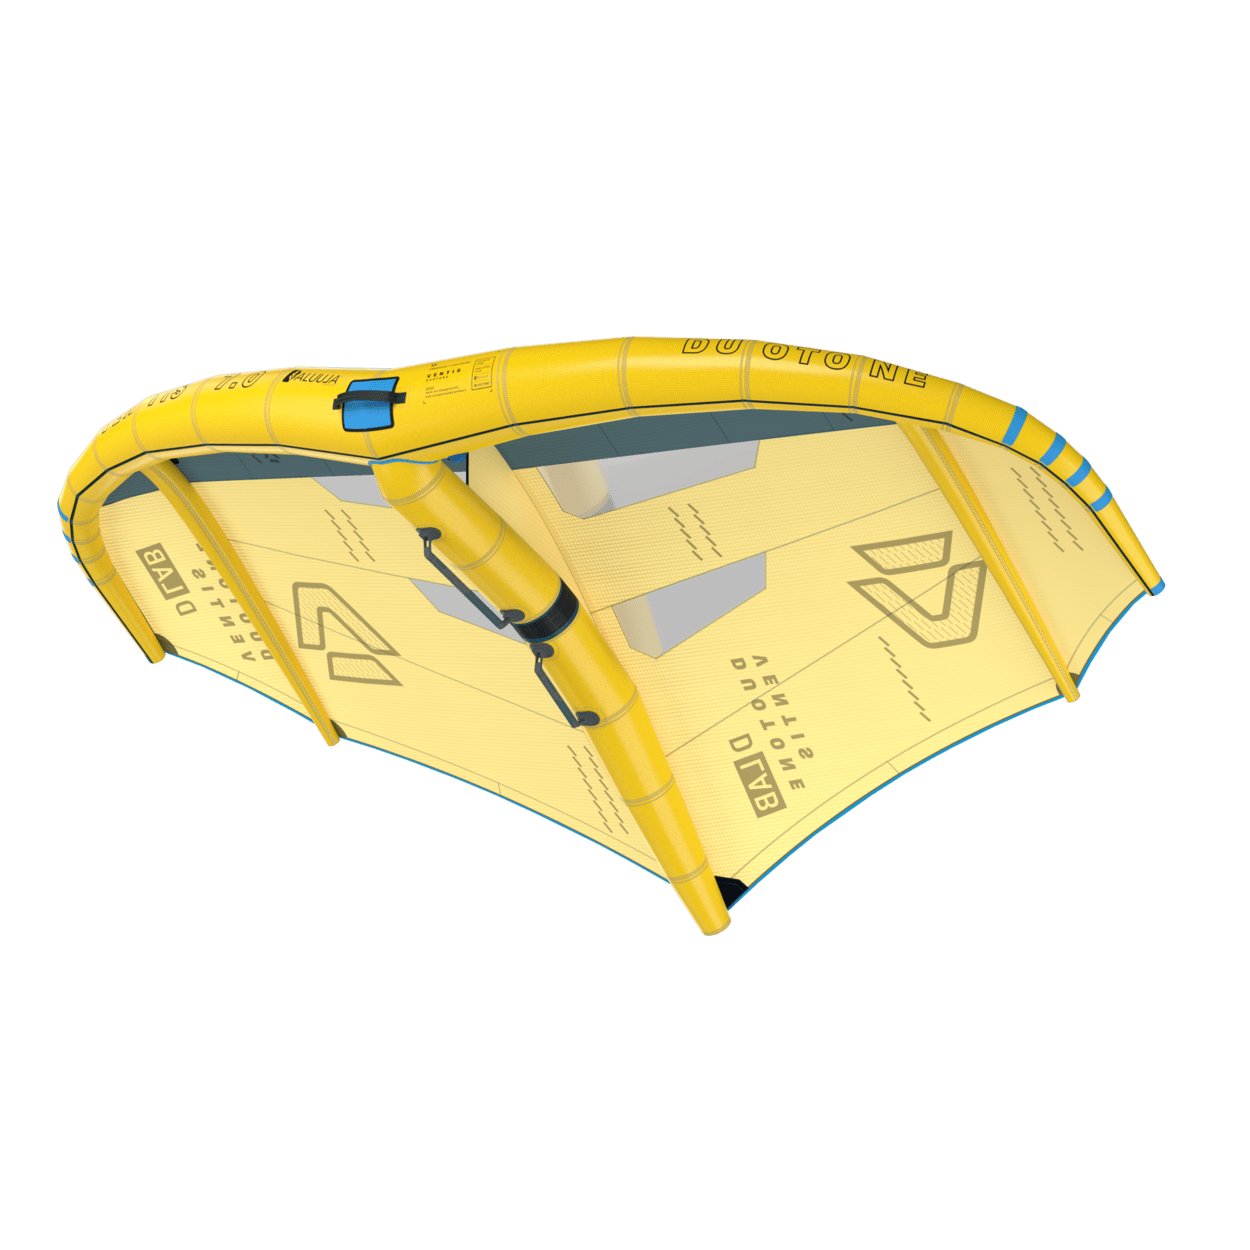 Duotone Foil Wing Ventis D/LAB 2024 - Worthing Watersports - 9010583182445 - Foilwing - Duotone X